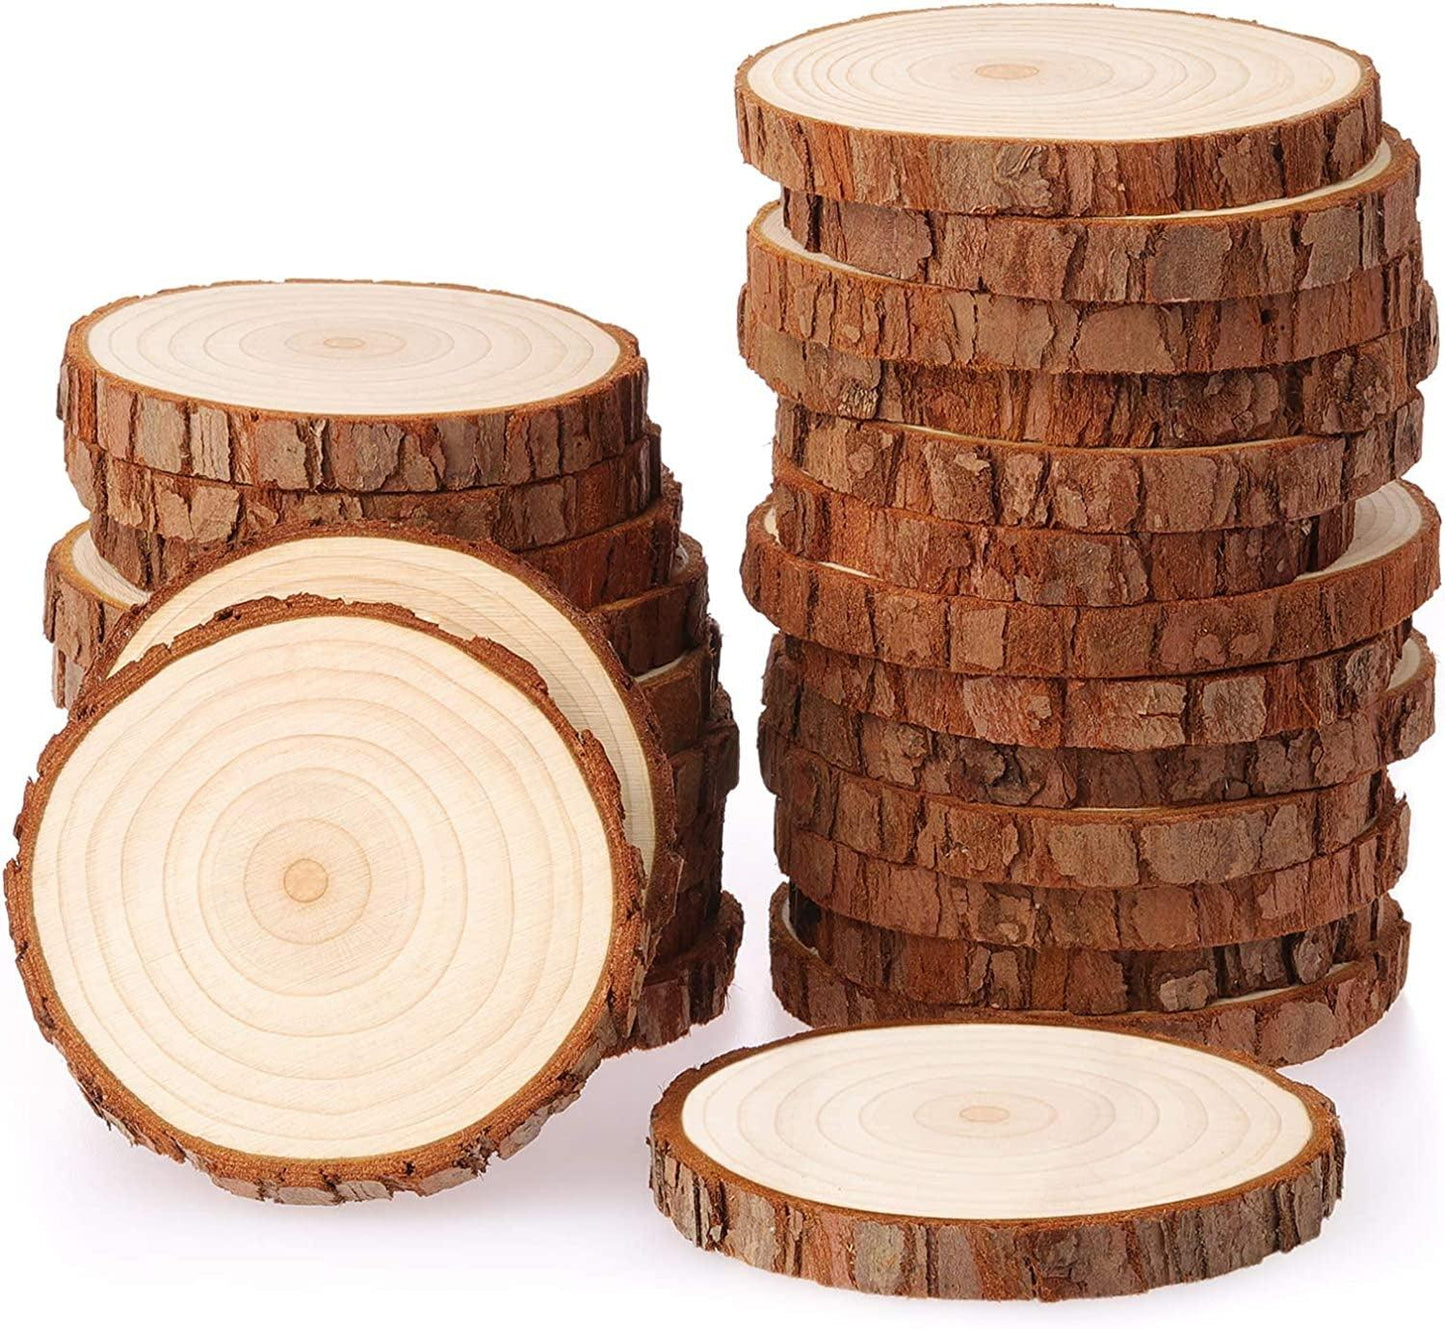 Natural Wood Slices 25 Pcs 3.1-3.5 Inches Unfinished Wood Craft Kit Undrilled Wooden Circles without Hole Tree - WoodArtSupply